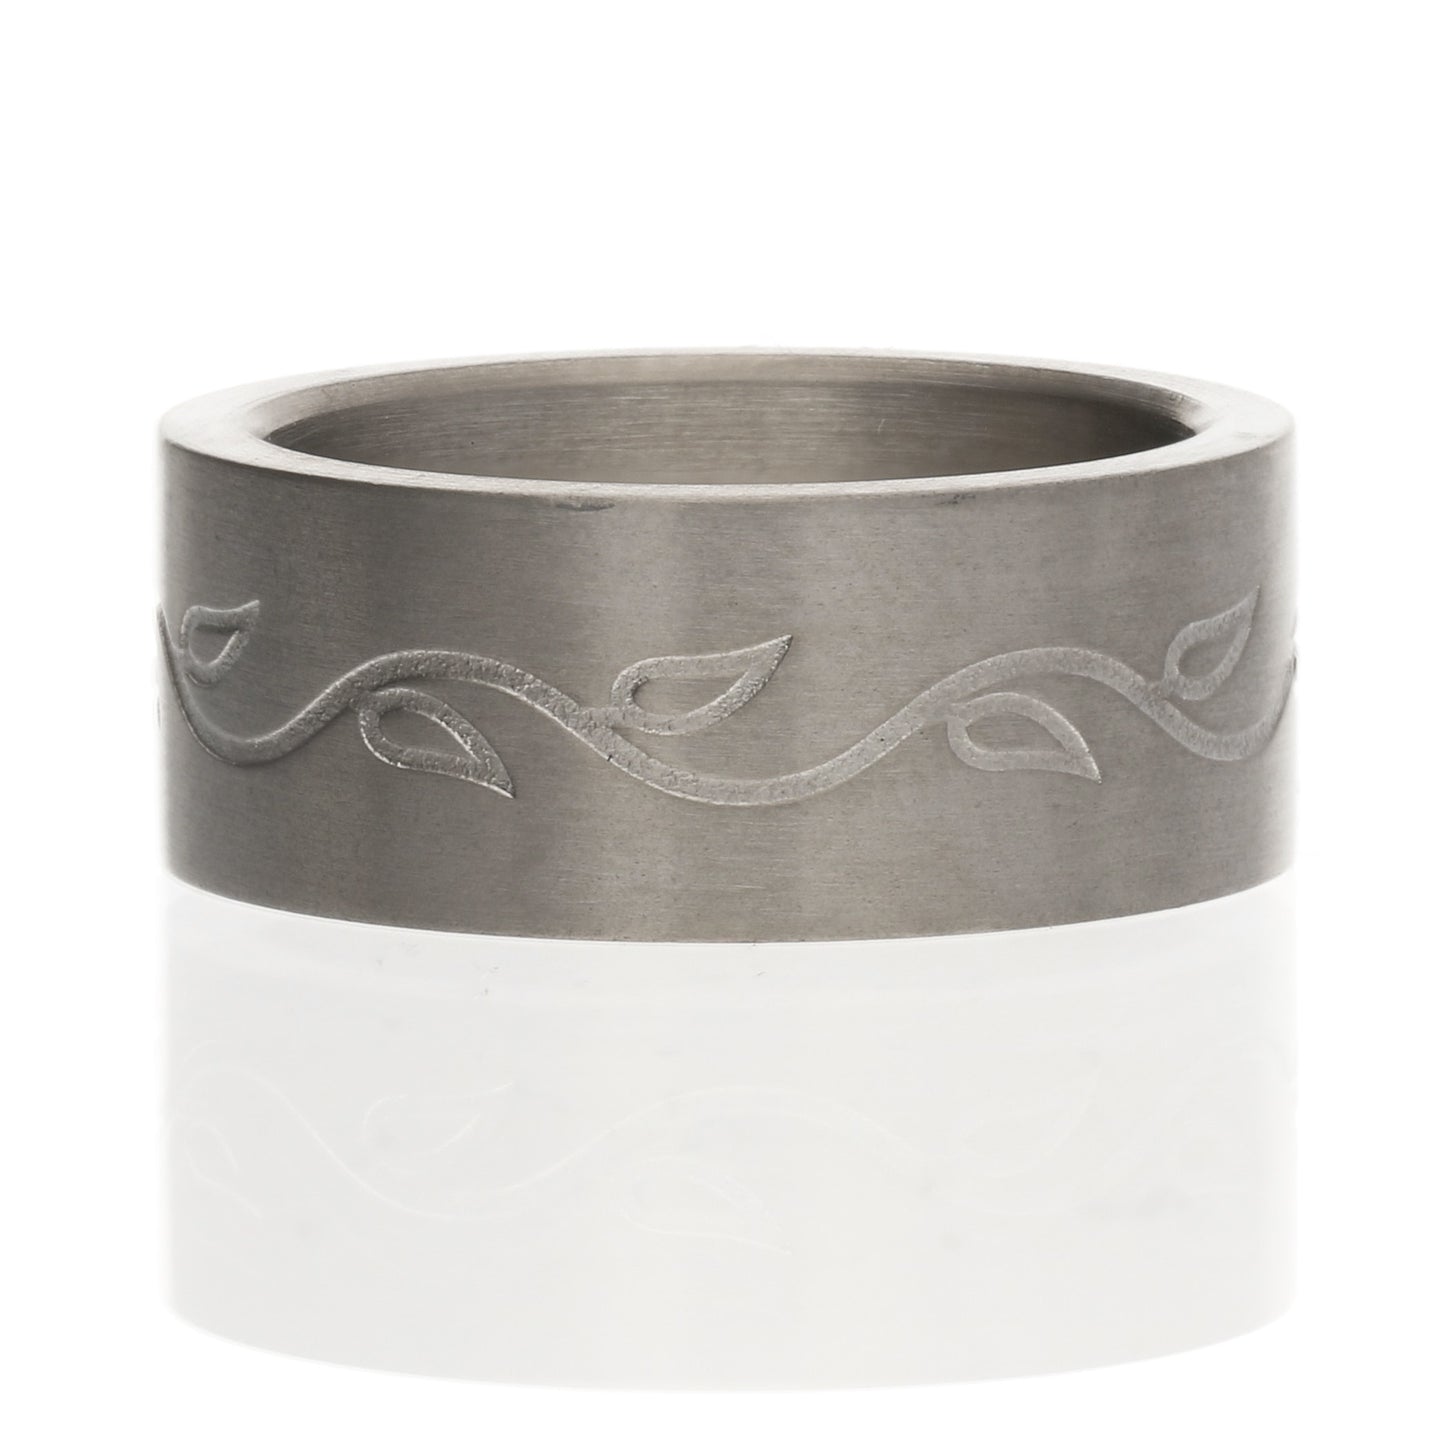 8mm Titanium Brushed Satin Vines and Leaves Wedding Band Ring - Silver Insanity